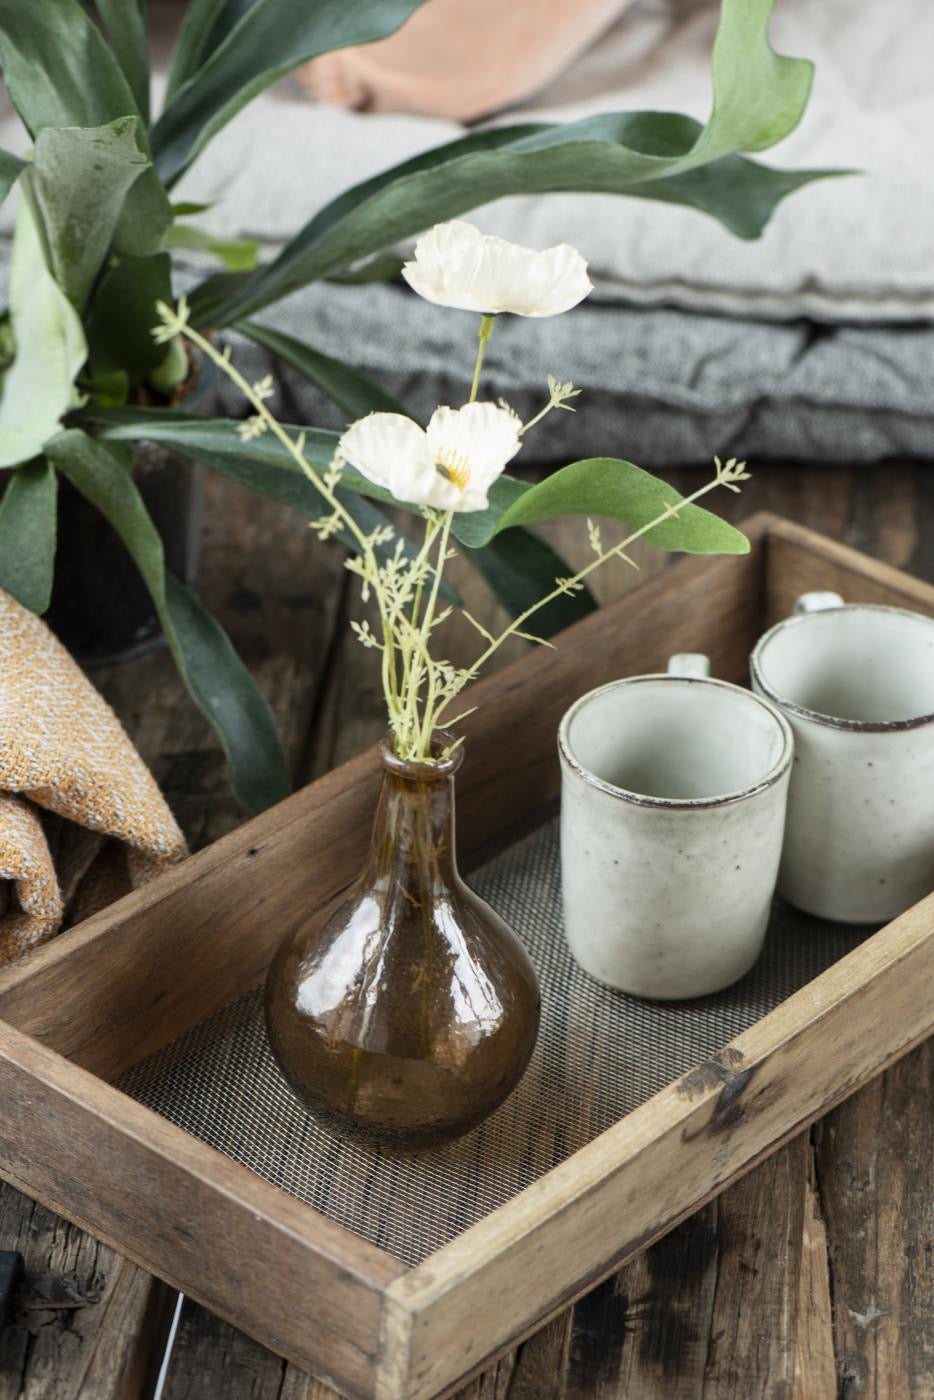 A wooden tray displaying a glass bud vase and two rustic mugs in the shade sand.